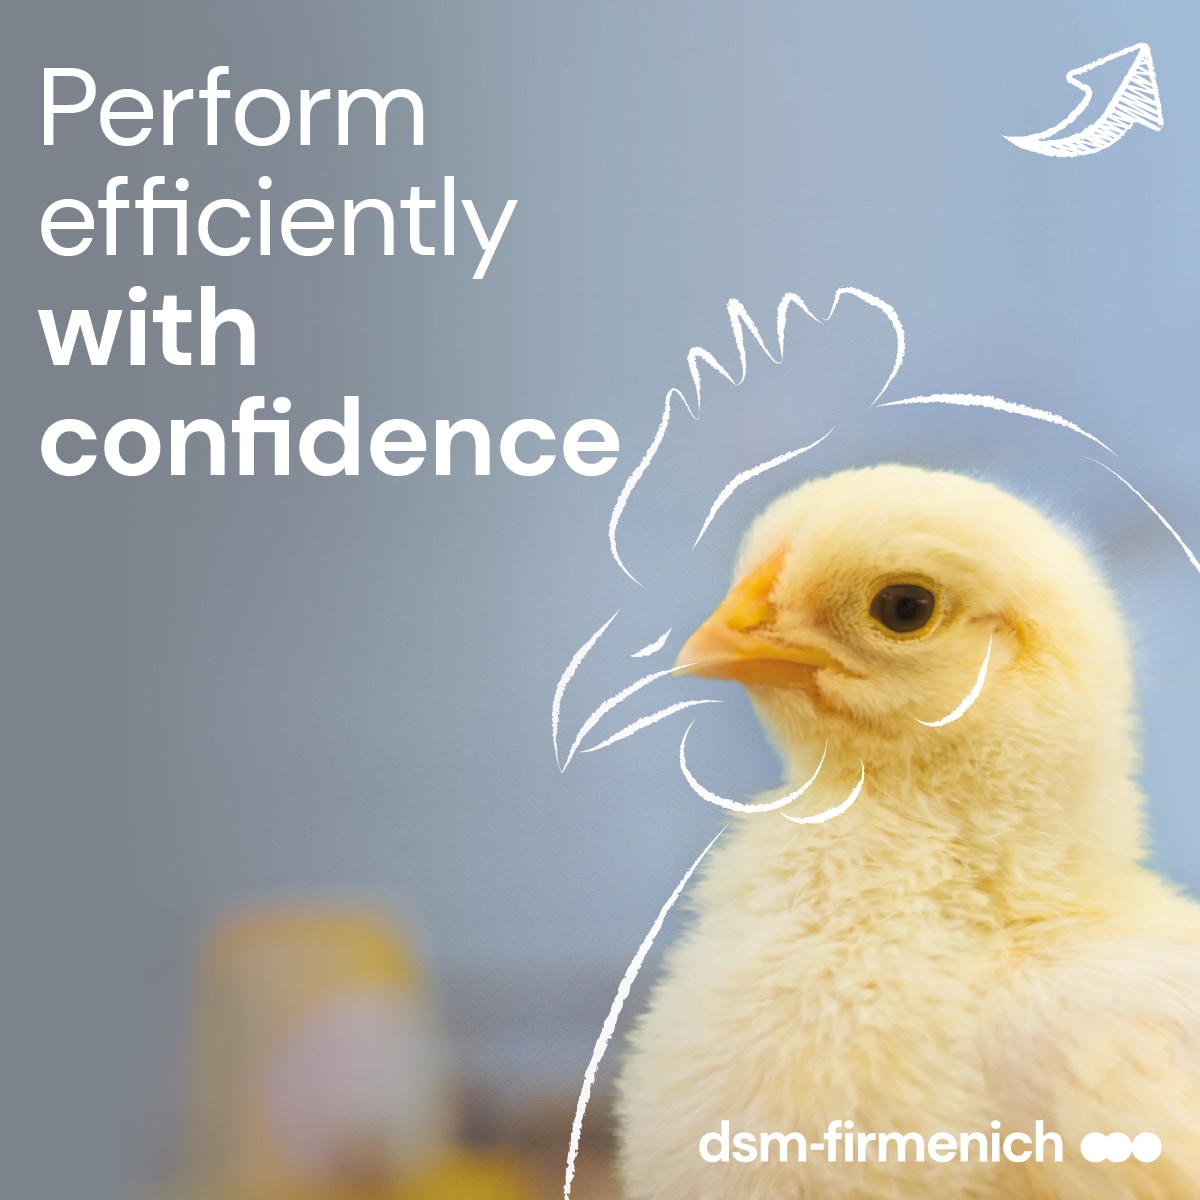 Perform efficiently with confidence